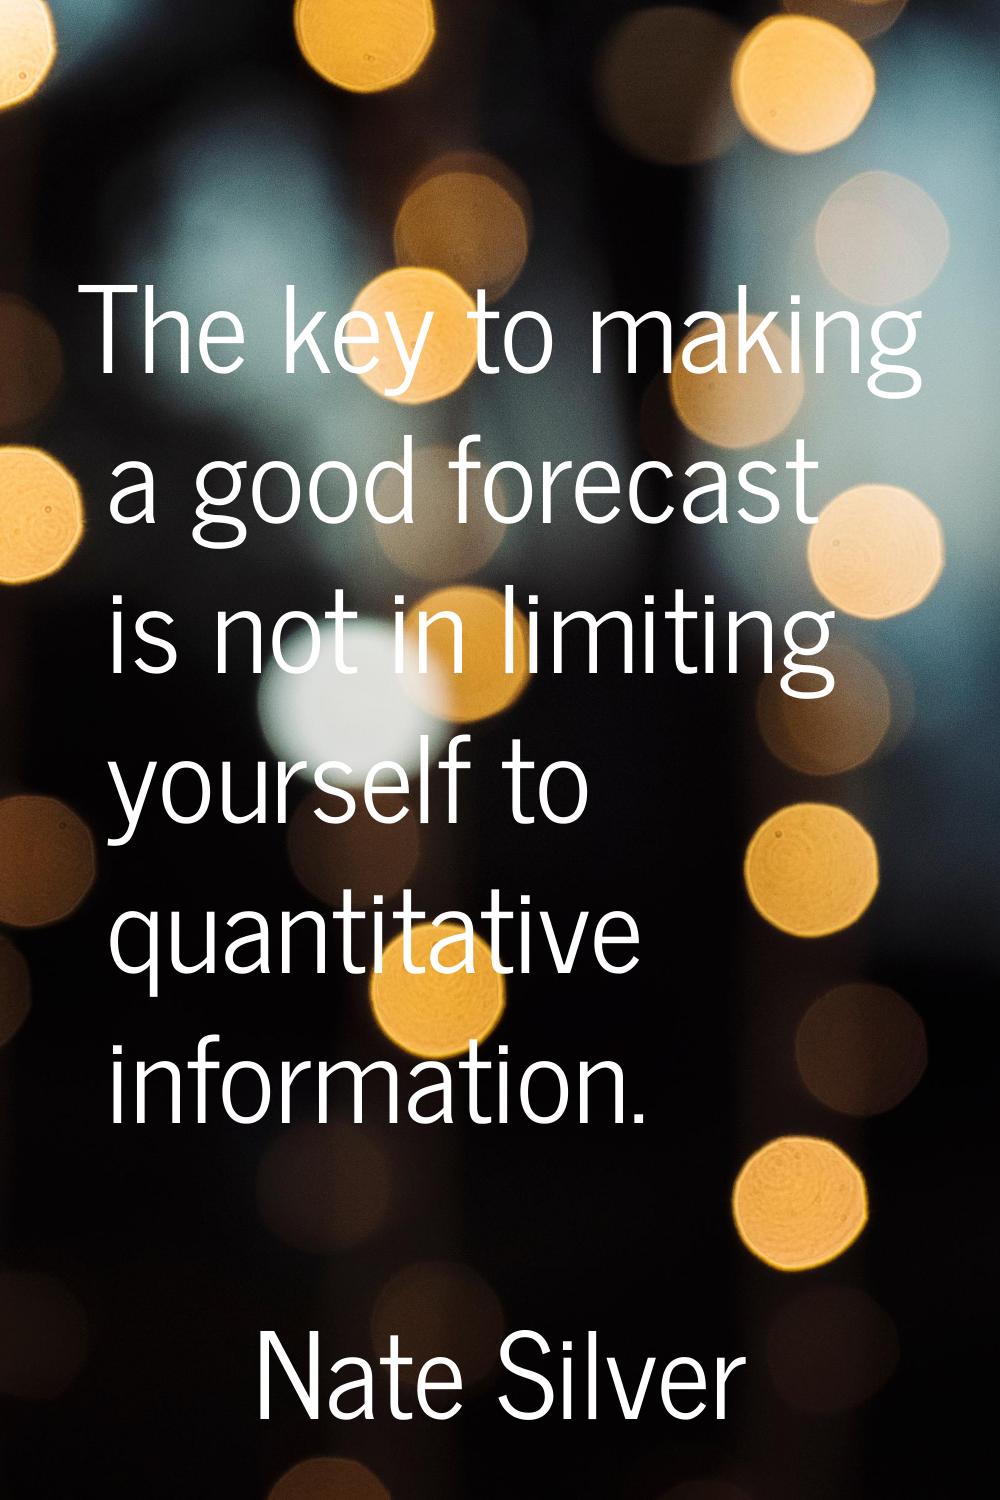 The key to making a good forecast is not in limiting yourself to quantitative information.